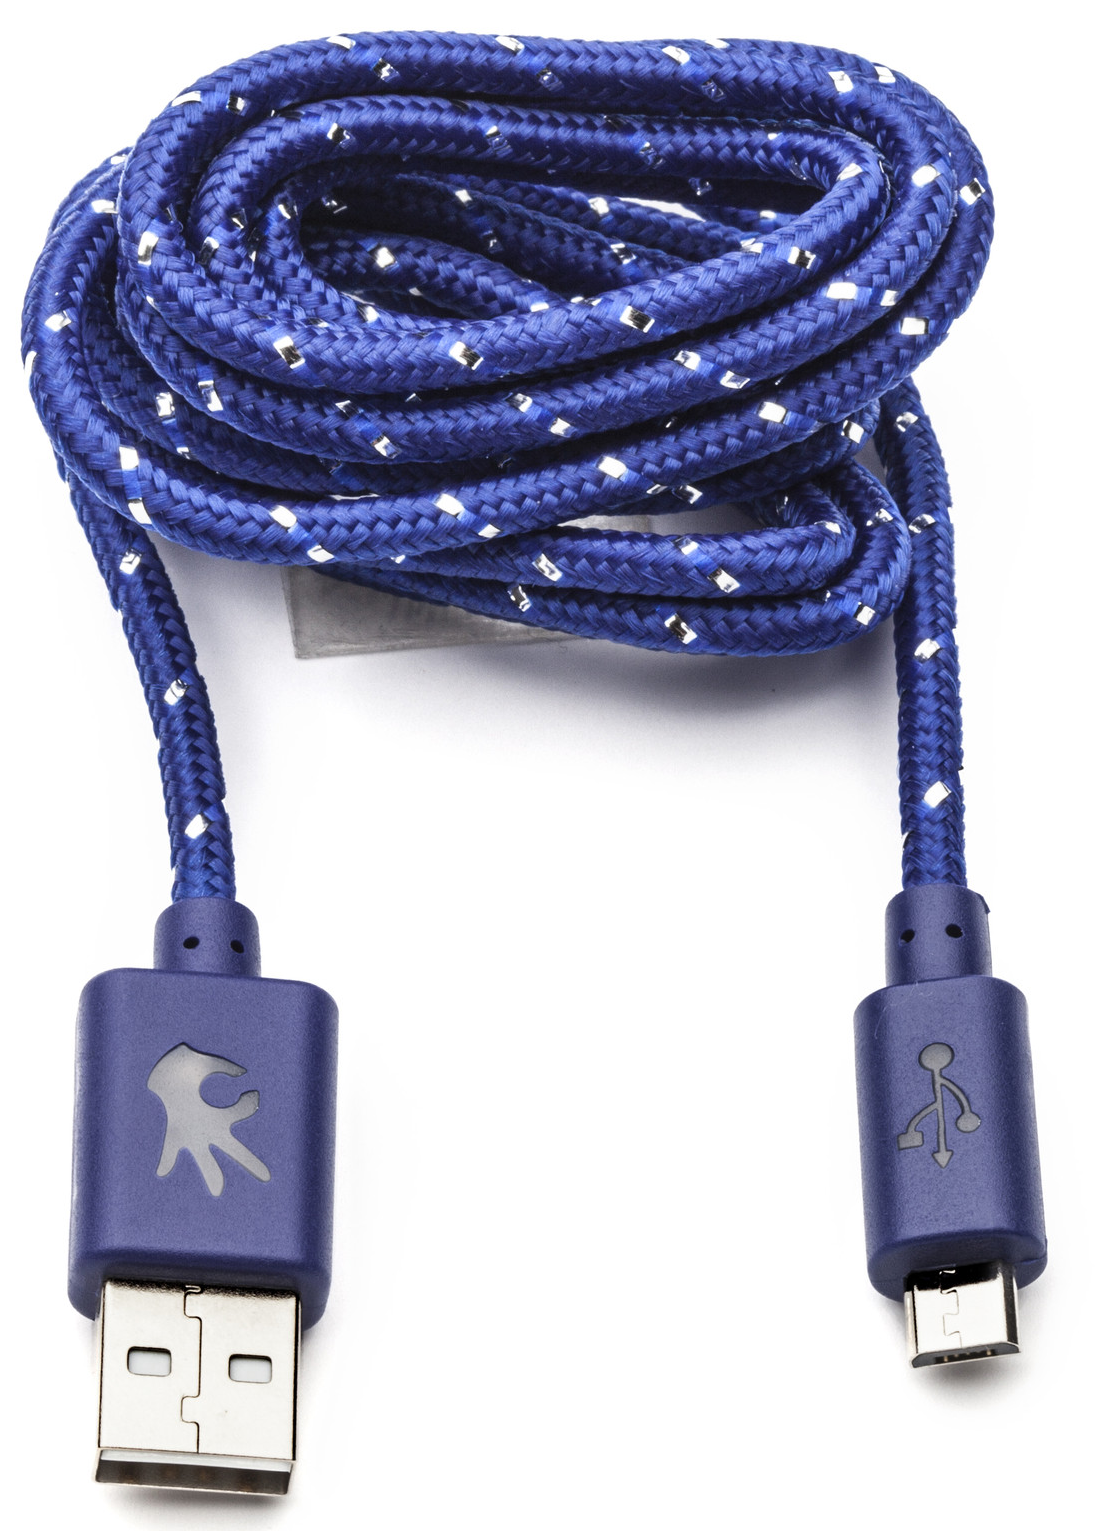 Cable for UART